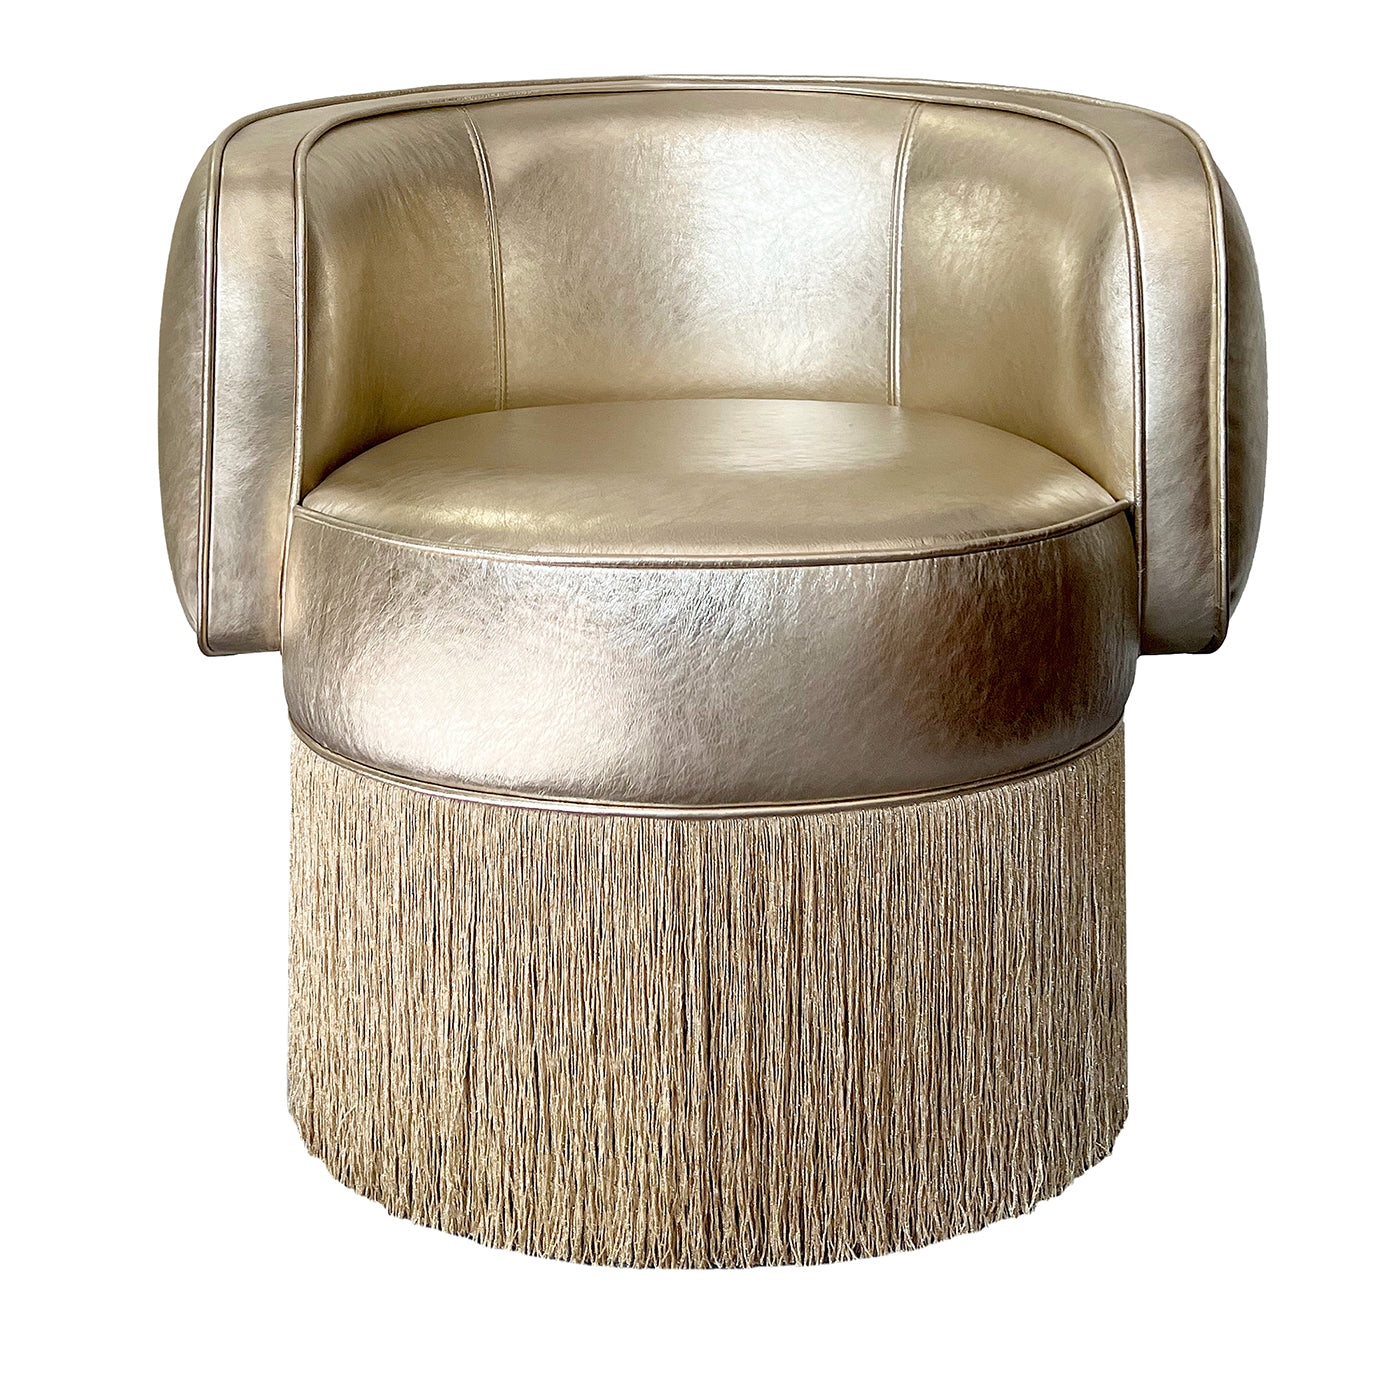 Gleaming Gold Metallic Leather Pirouette Armchair - Main view